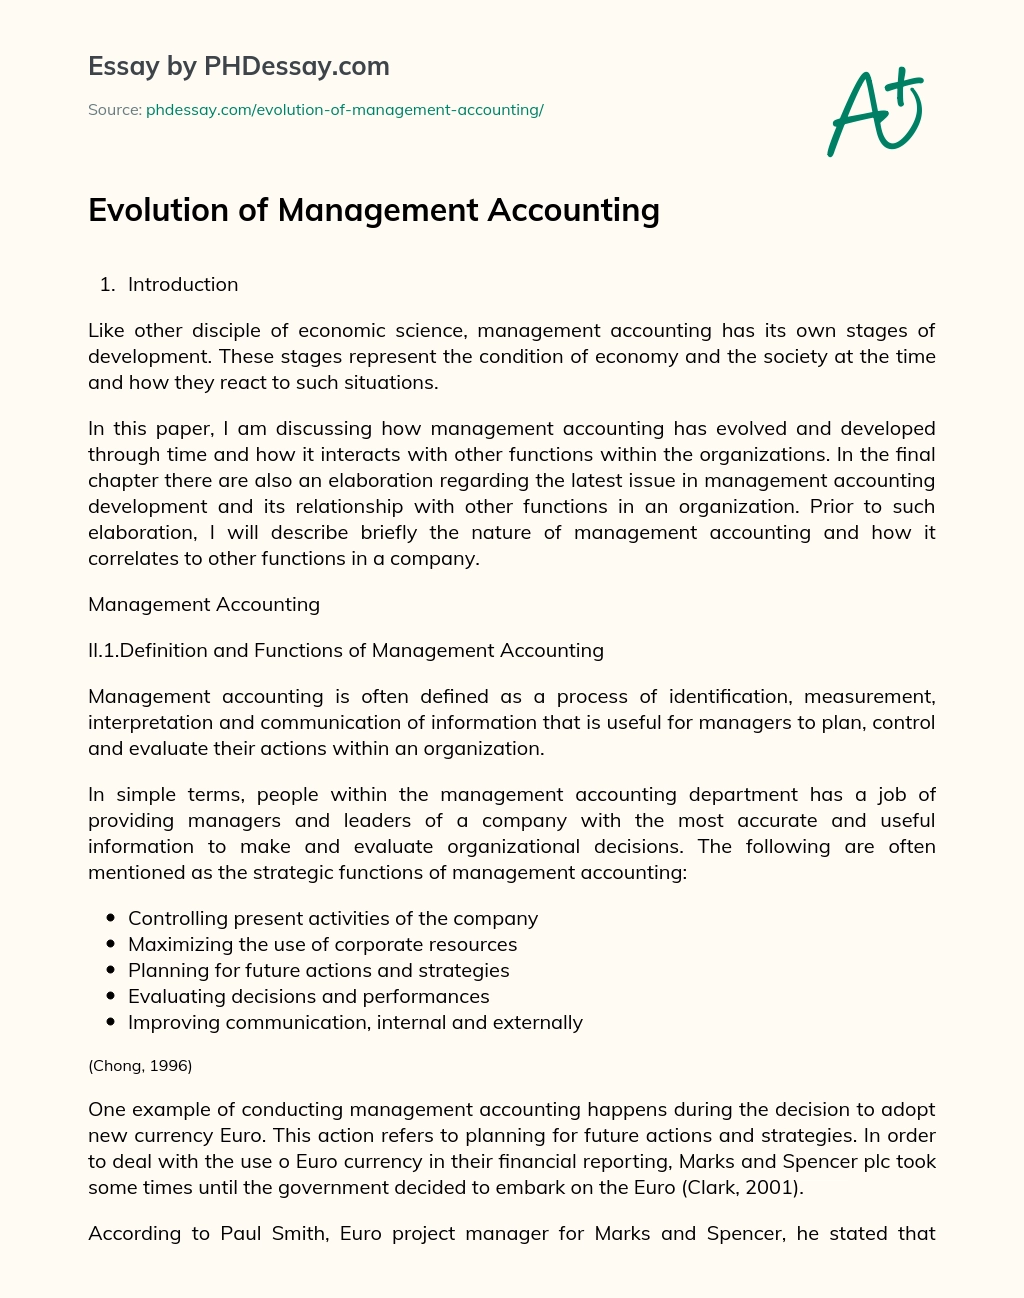 Evolution of Management Accounting essay